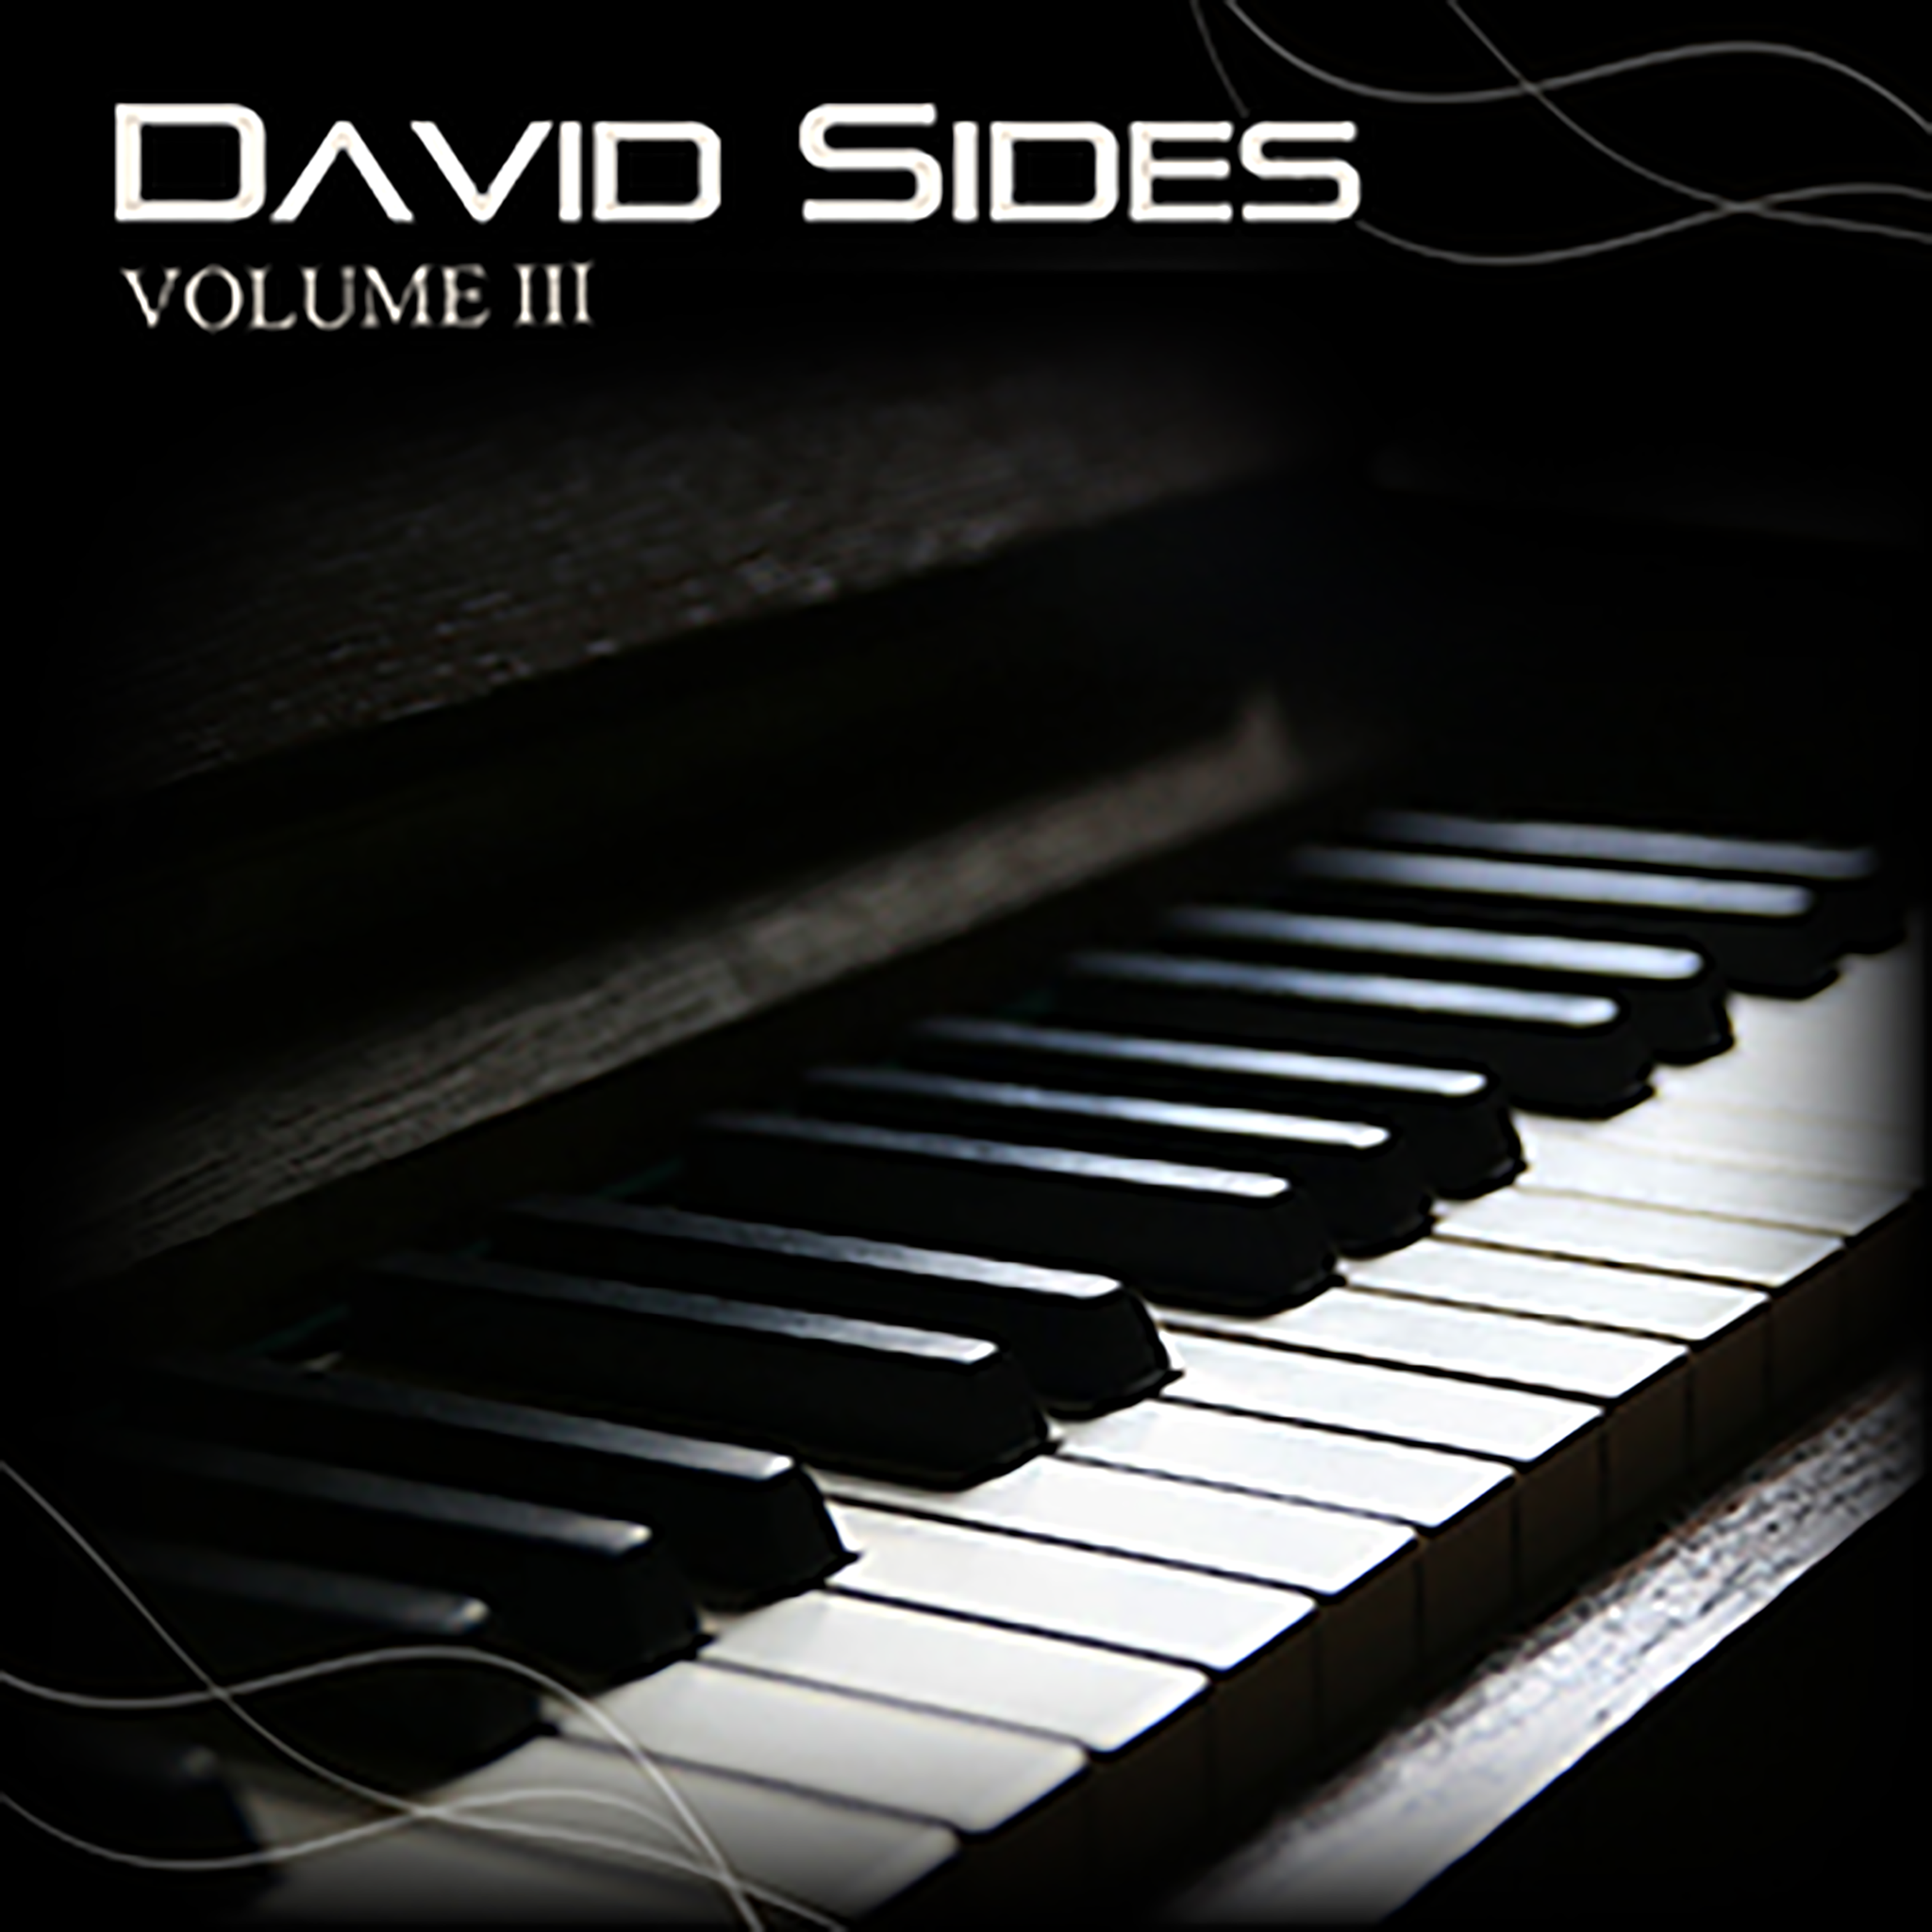 The Collection, Volume 3: Piano Covers of Popular Songs